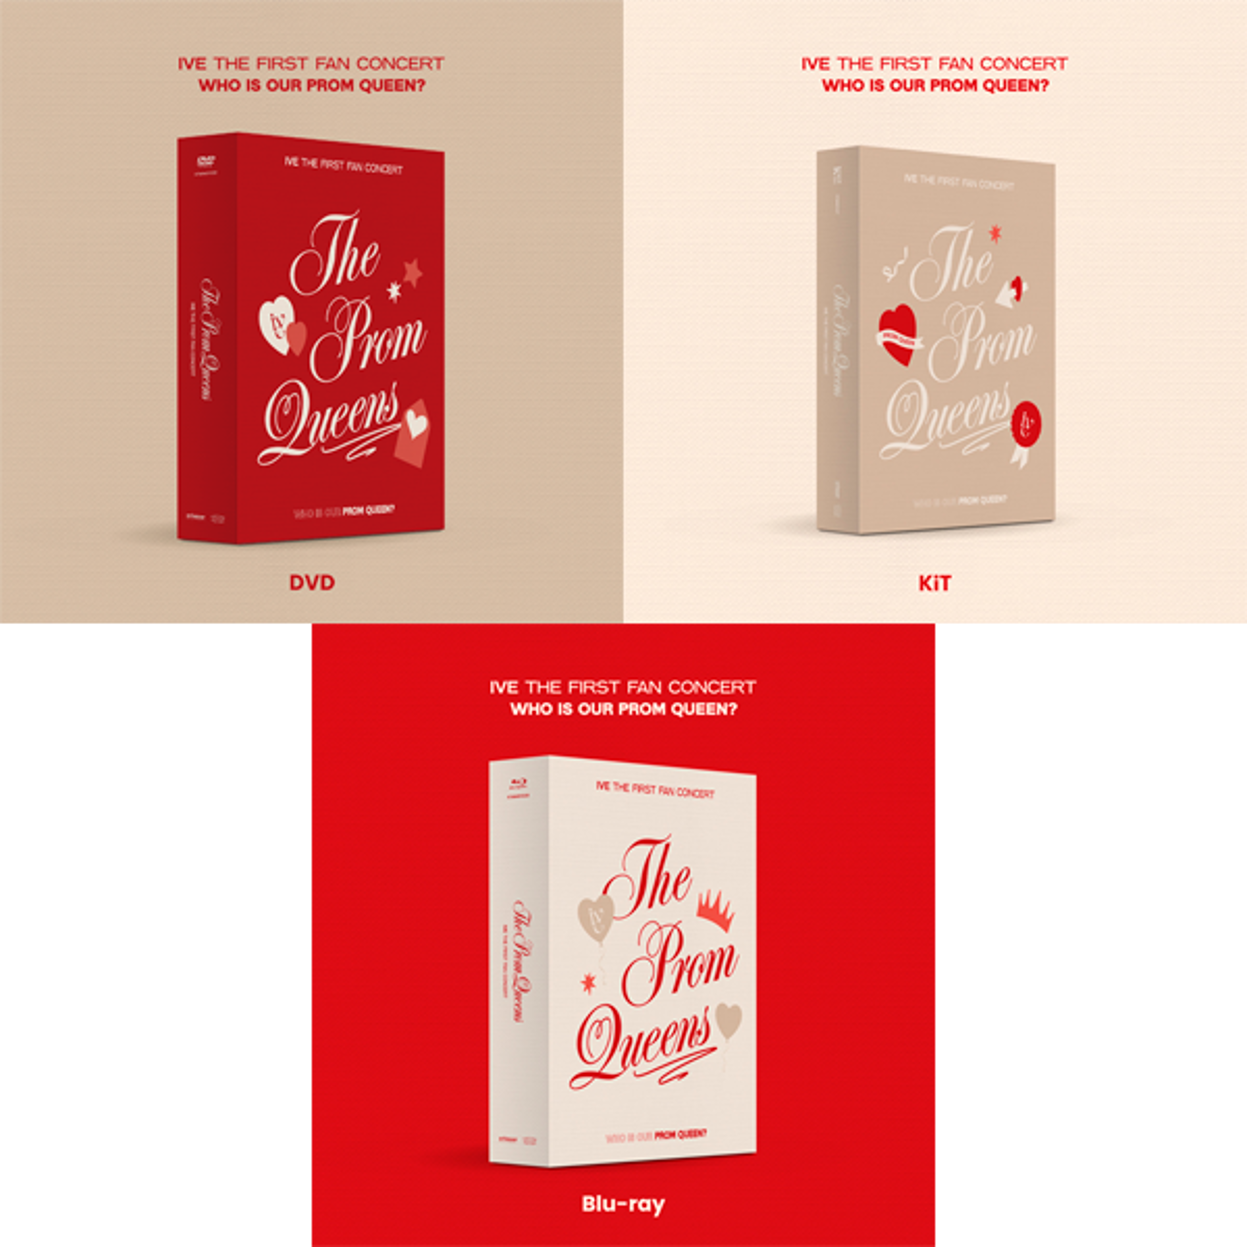 [3SET] 아이브 (IVE) - IVE THE FIRST FAN CONCERT [The Prom Queens] DVD + KIT VIDEO + Blu-ray